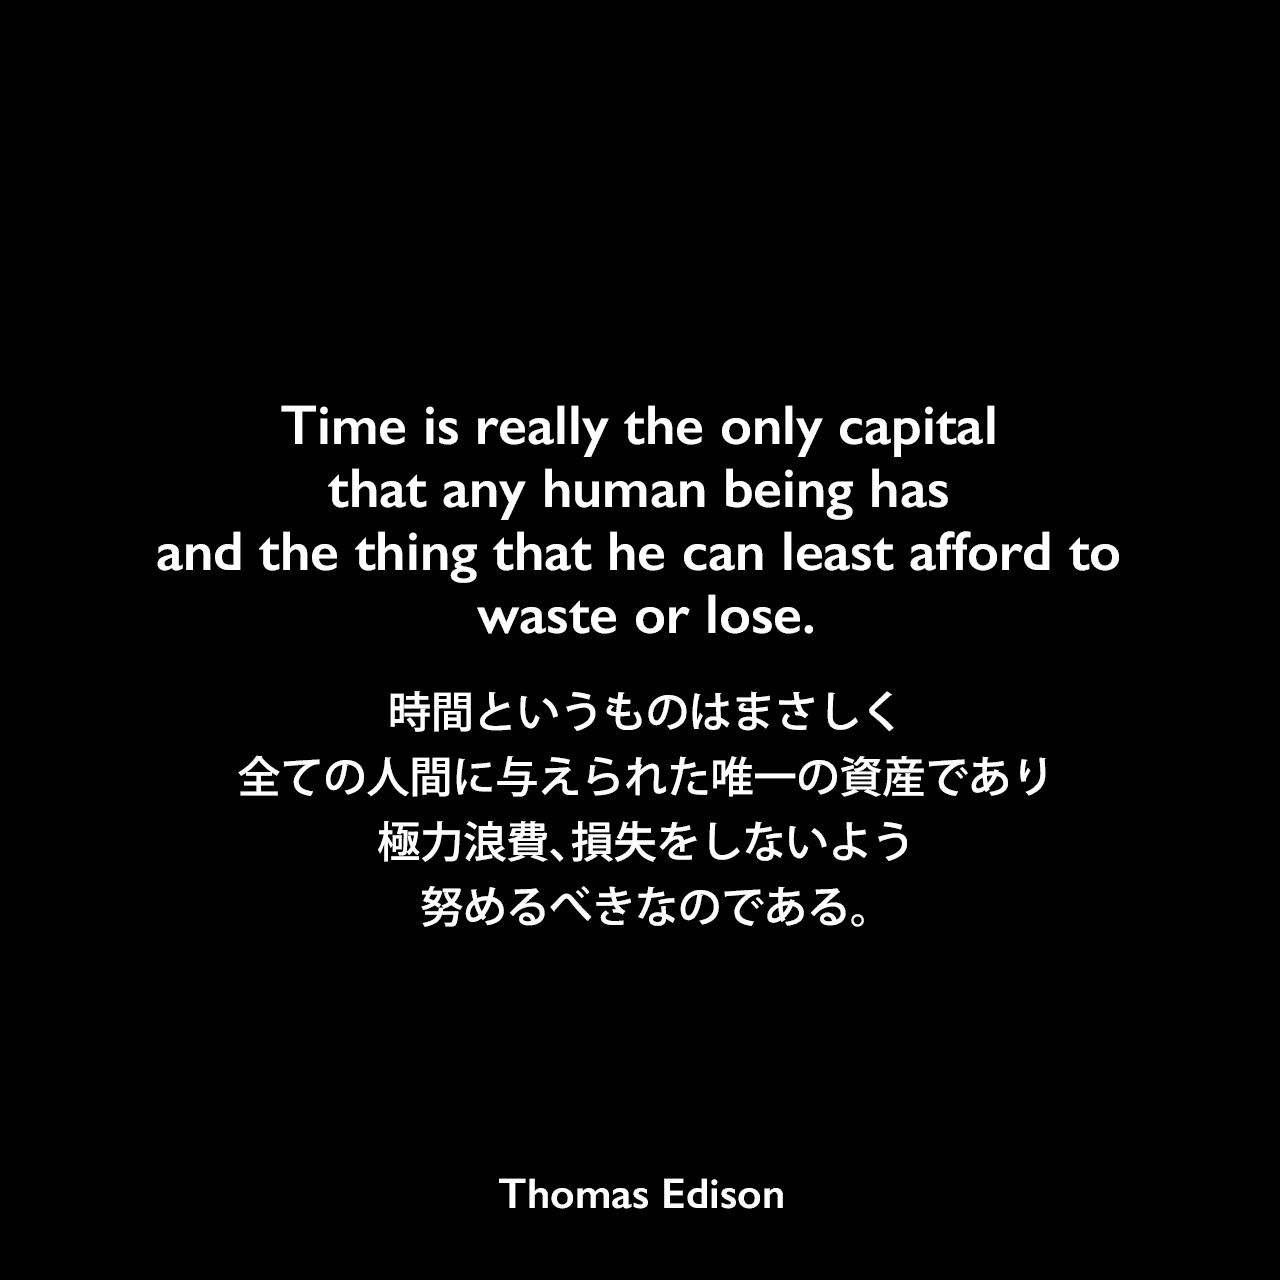 Time is really the only capital that any human being has and the thing that he can least afford to waste or lose.時間というものはまさしく全ての人間に与えられた唯一の資産であり、極力浪費、損失をしないよう努めるべきなのである。Thomas Edison